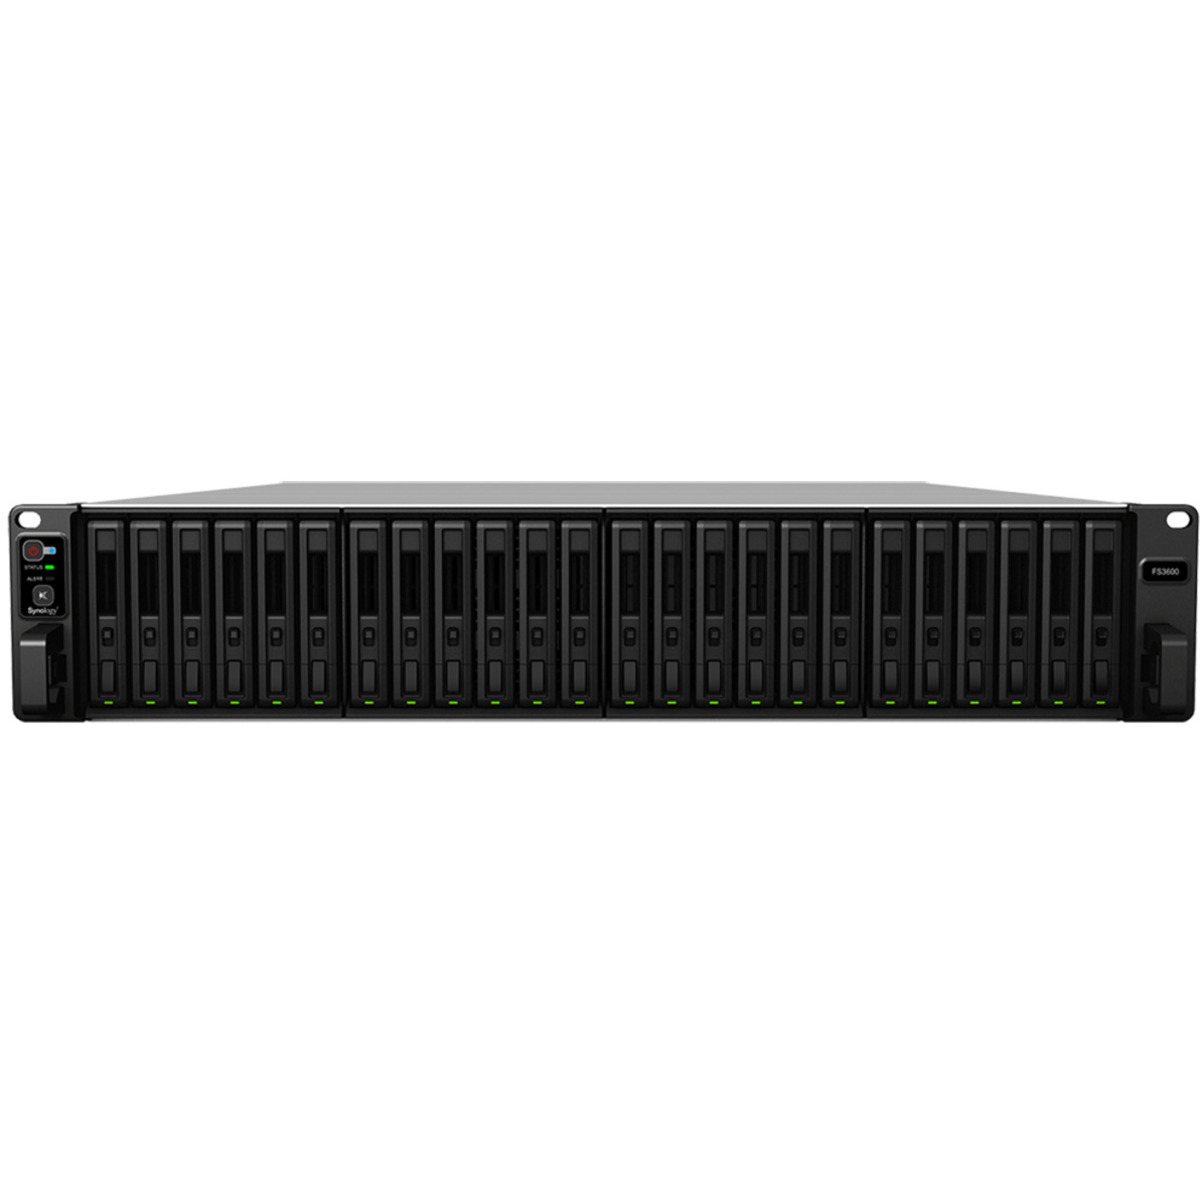 Synology FlashStation FS3600 72tb 24-Bay RackMount Large Business / Enterprise NAS - Network Attached Storage Device 18x4tb Sandisk Ultra 3D SDSSDH3-4T00 2.5 560/520MB/s SATA 6Gb/s SSD CONSUMER Class Drives Installed - Burn-In Tested - FREE RAM UPGRADE FlashStation FS3600